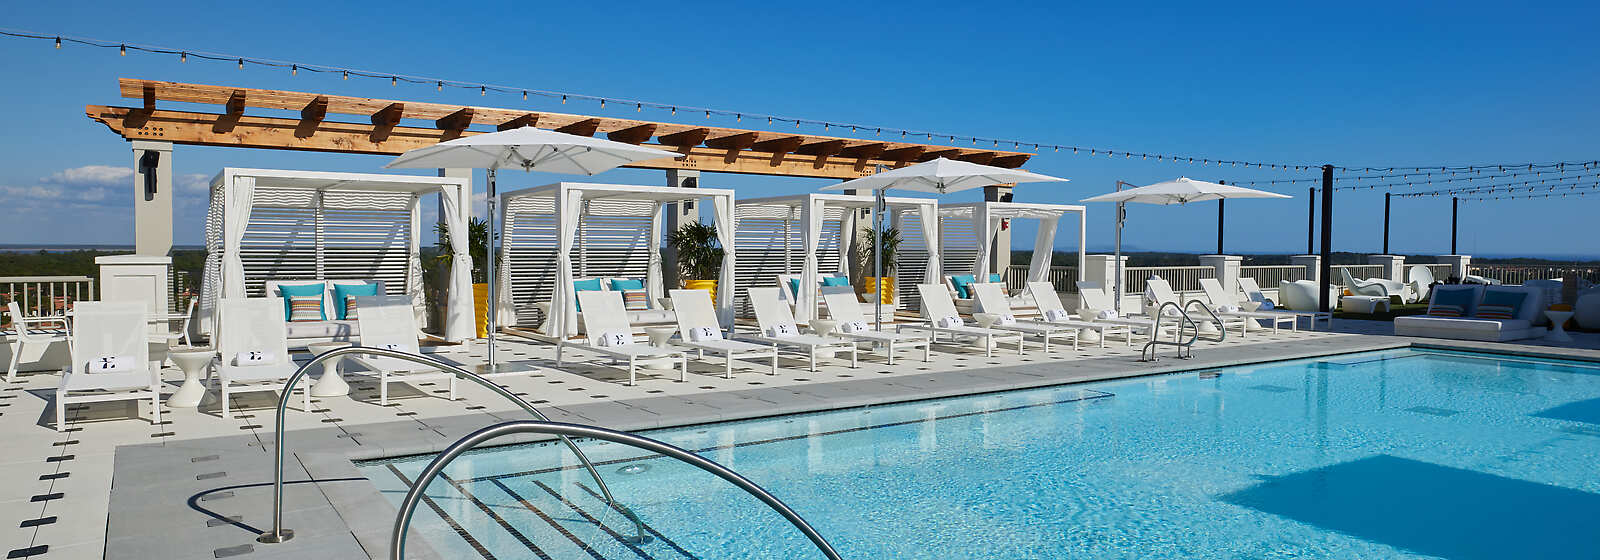 Heated spa pool, private luxury cabanas and a panoramic view of Sandestin Golf and Beach Resort.